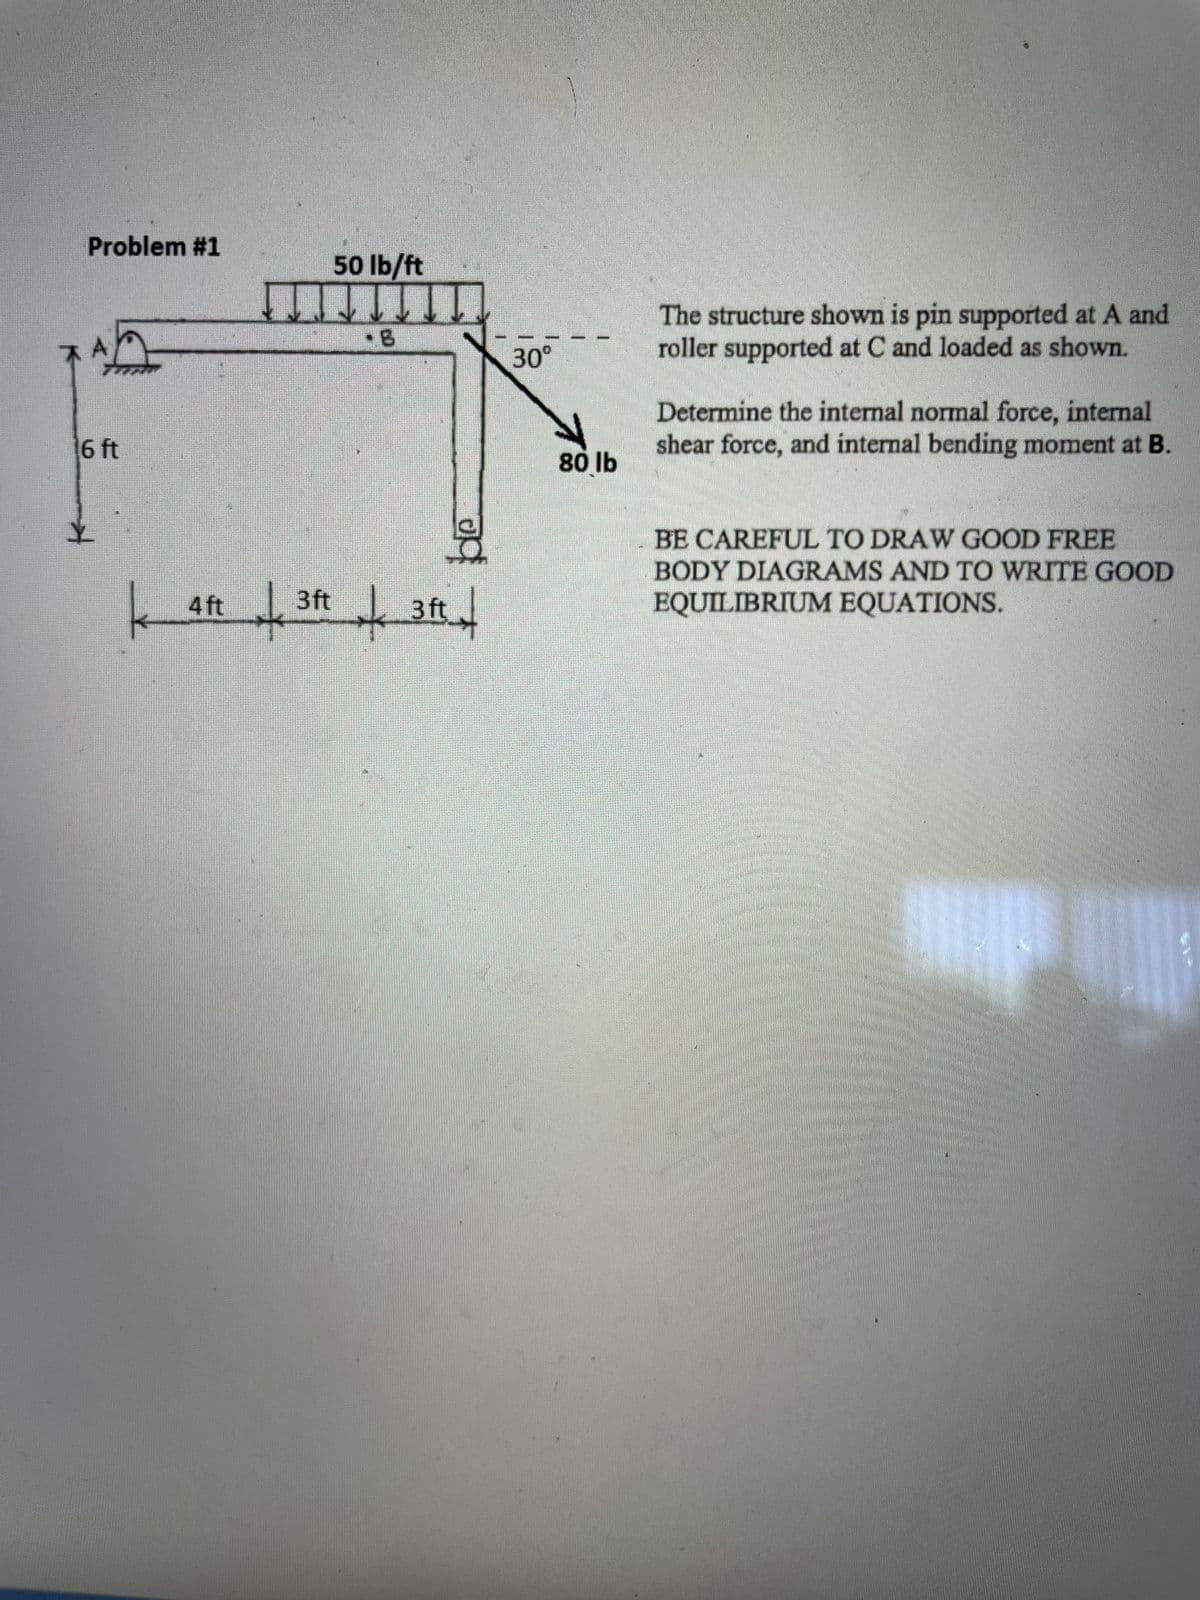 Problem #1
6 ft
Y
k
4 ft
+³
50 lb/ft
3ft
3 ft
op
30°
80 lb
The structure shown is pin supported at A and
roller supported at C and loaded as shown.
Determine the internal normal force, internal
shear force, and internal bending moment at B.
BE CAREFUL TO DRAW GOOD FREE
BODY DIAGRAMS AND TO WRITE GOOD
EQUILIBRIUM EQUATIONS.